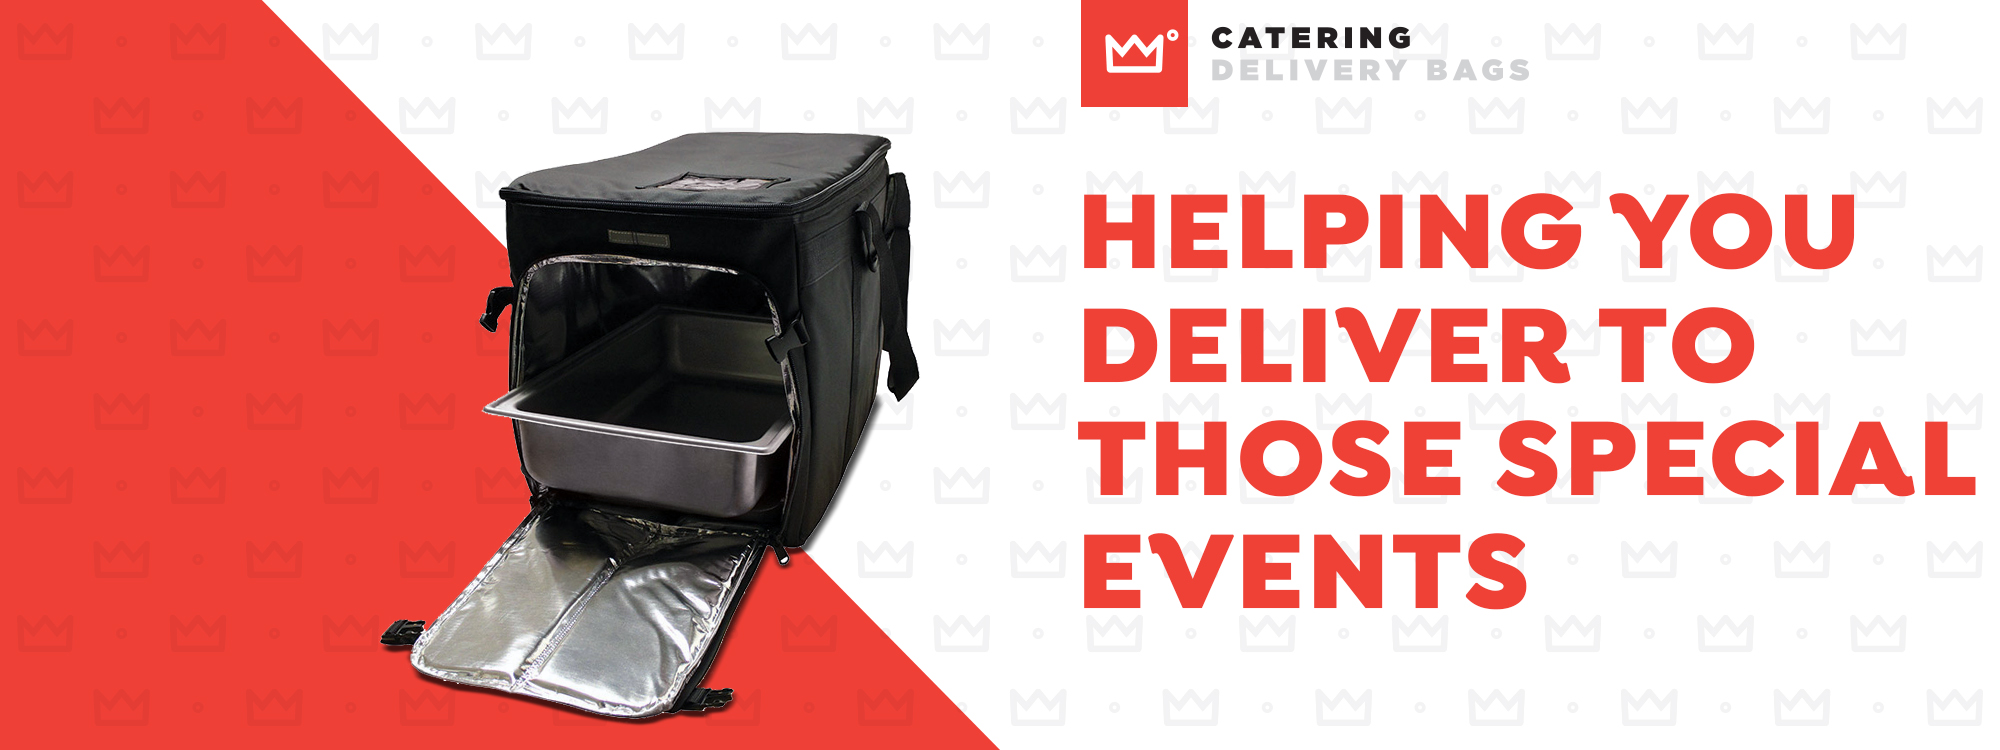 Catering Delivery Bags - Incredible Bags